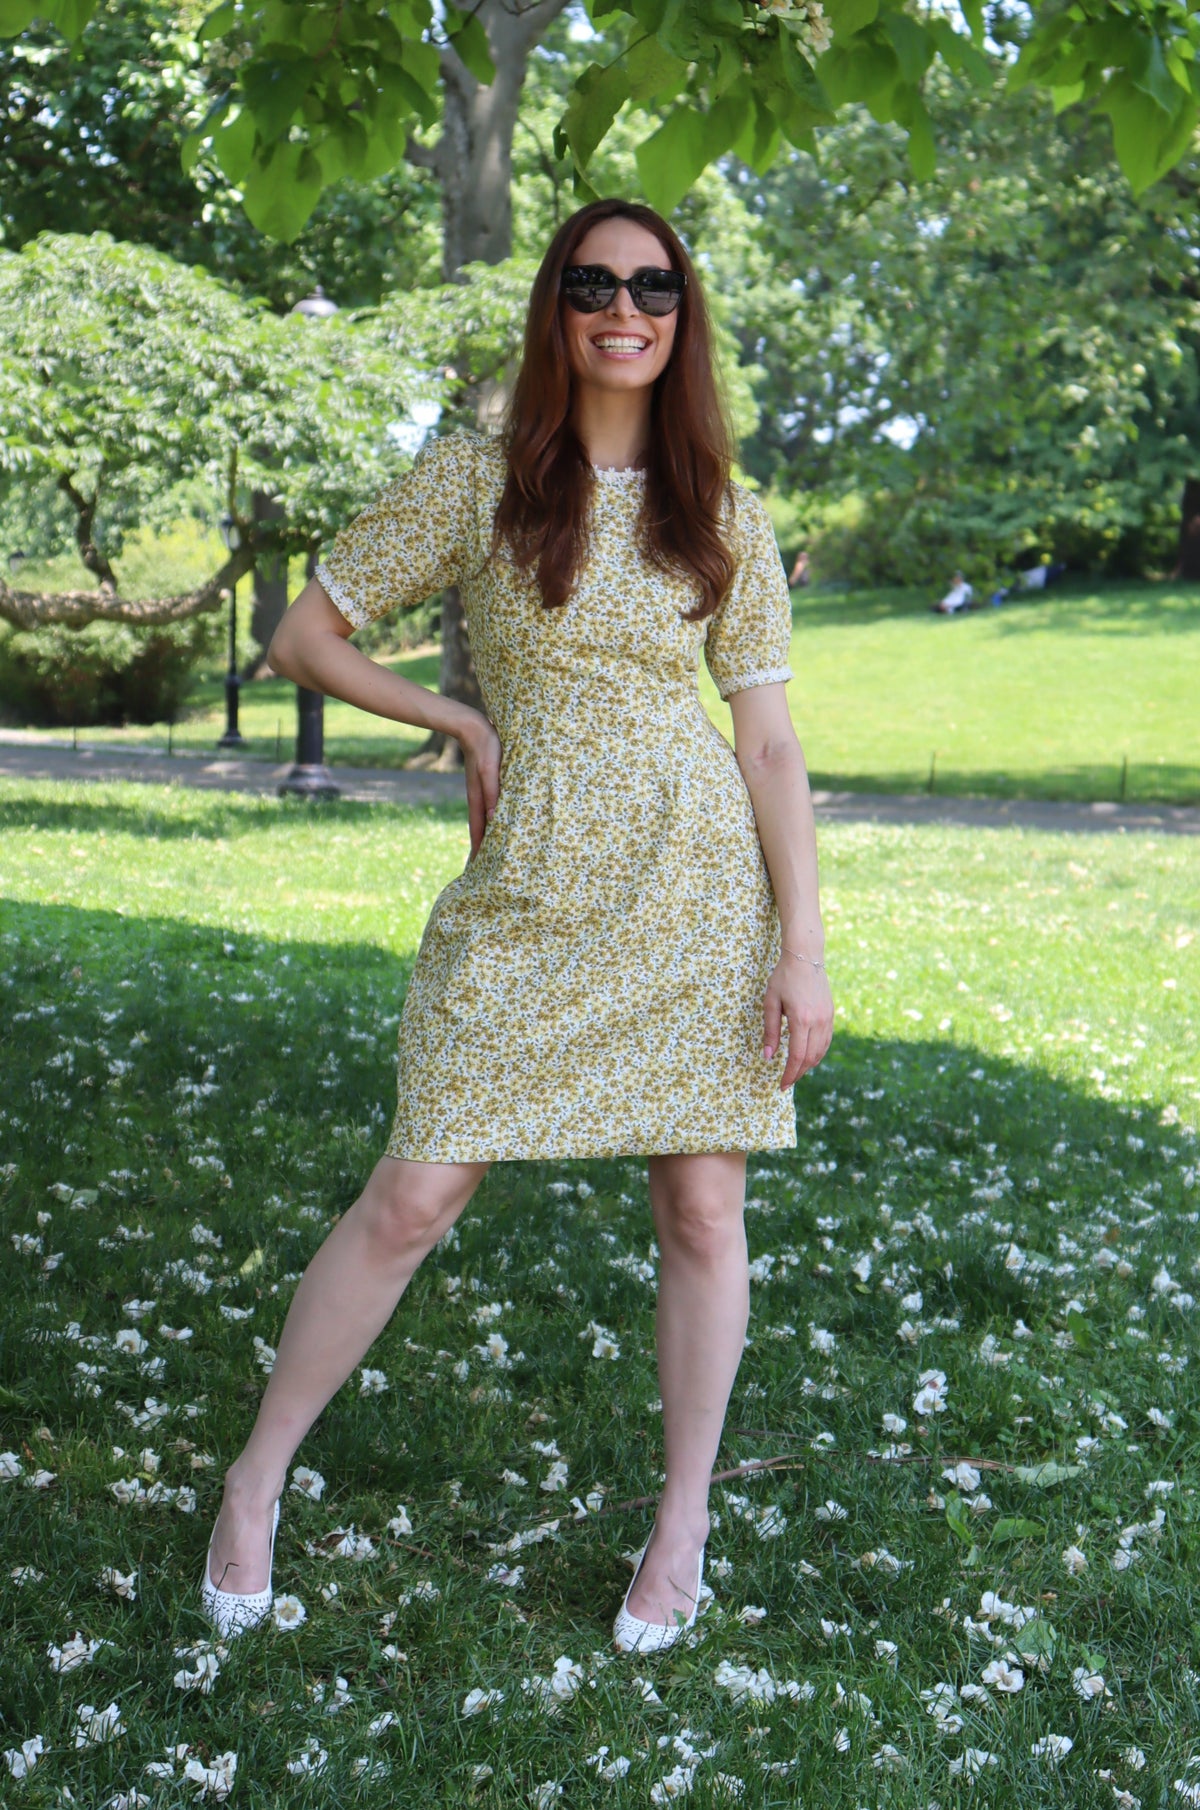 Model in short yellow floral dress with short sleeves and white daisy trim with trees in the background.